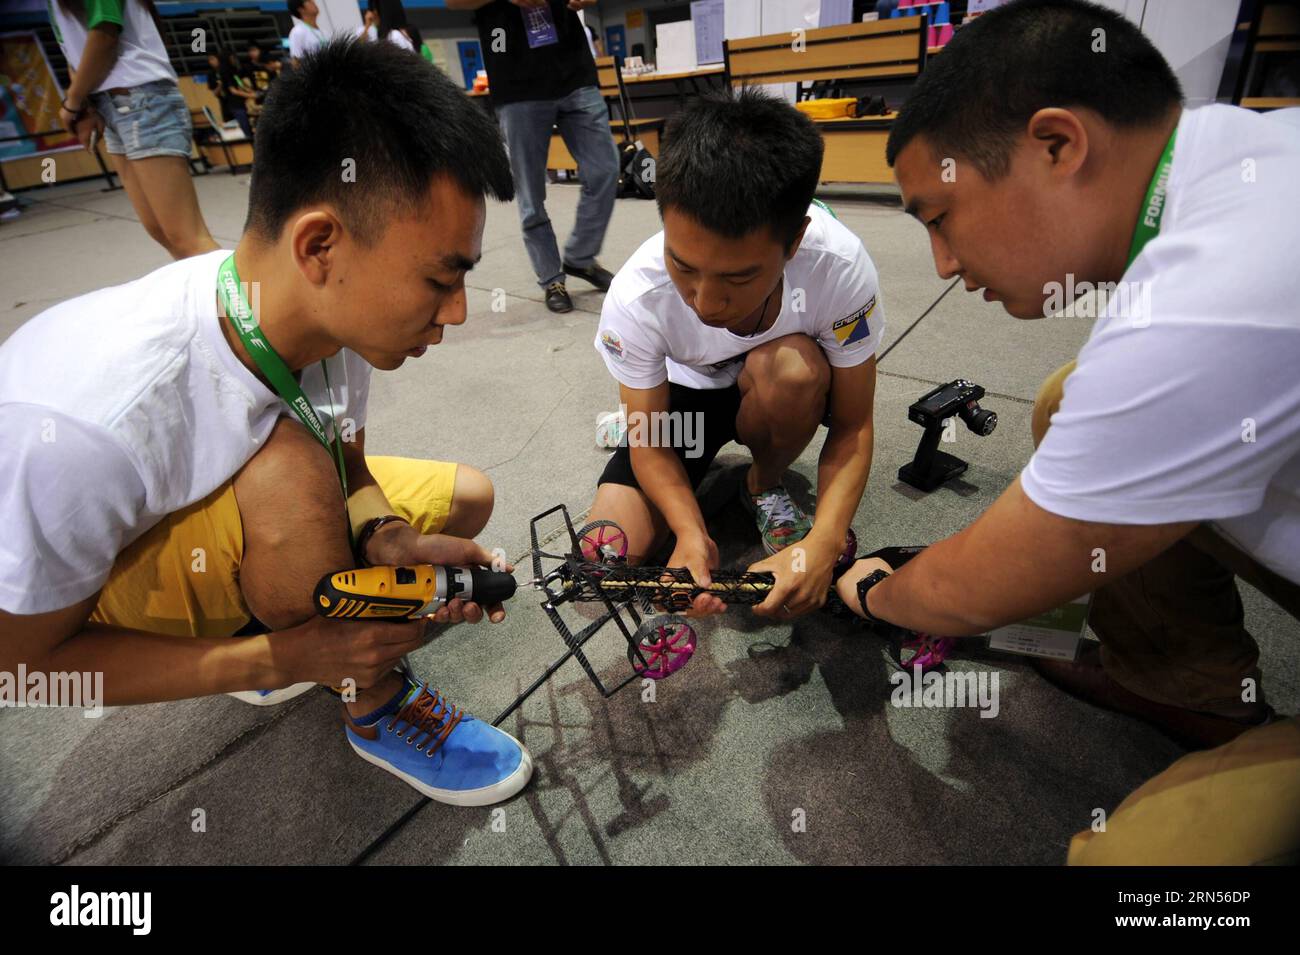 (150615) -- BEIJING, June 15, 2015 -- Competitors twist rubber band to supply power for their elastic model car during the competition in Beijing, capital of China, June 15, 2015. The 2015 Formula-E China Design Championship was held at Beijing University of Technology on Monday. Thirty-five teams from fourteen universities in China competed for the opportunity to attend the global final held in Los Angeles in August. ) (zkr) CHINA-BEIJING-FORMULA-E DESIGN CHAMPIONSHIP(CN) LiuxYongzhen PUBLICATIONxNOTxINxCHN   Beijing June 15 2015 Competitors Twist Rubber Tie to Supply Power for their Elastic Stock Photo